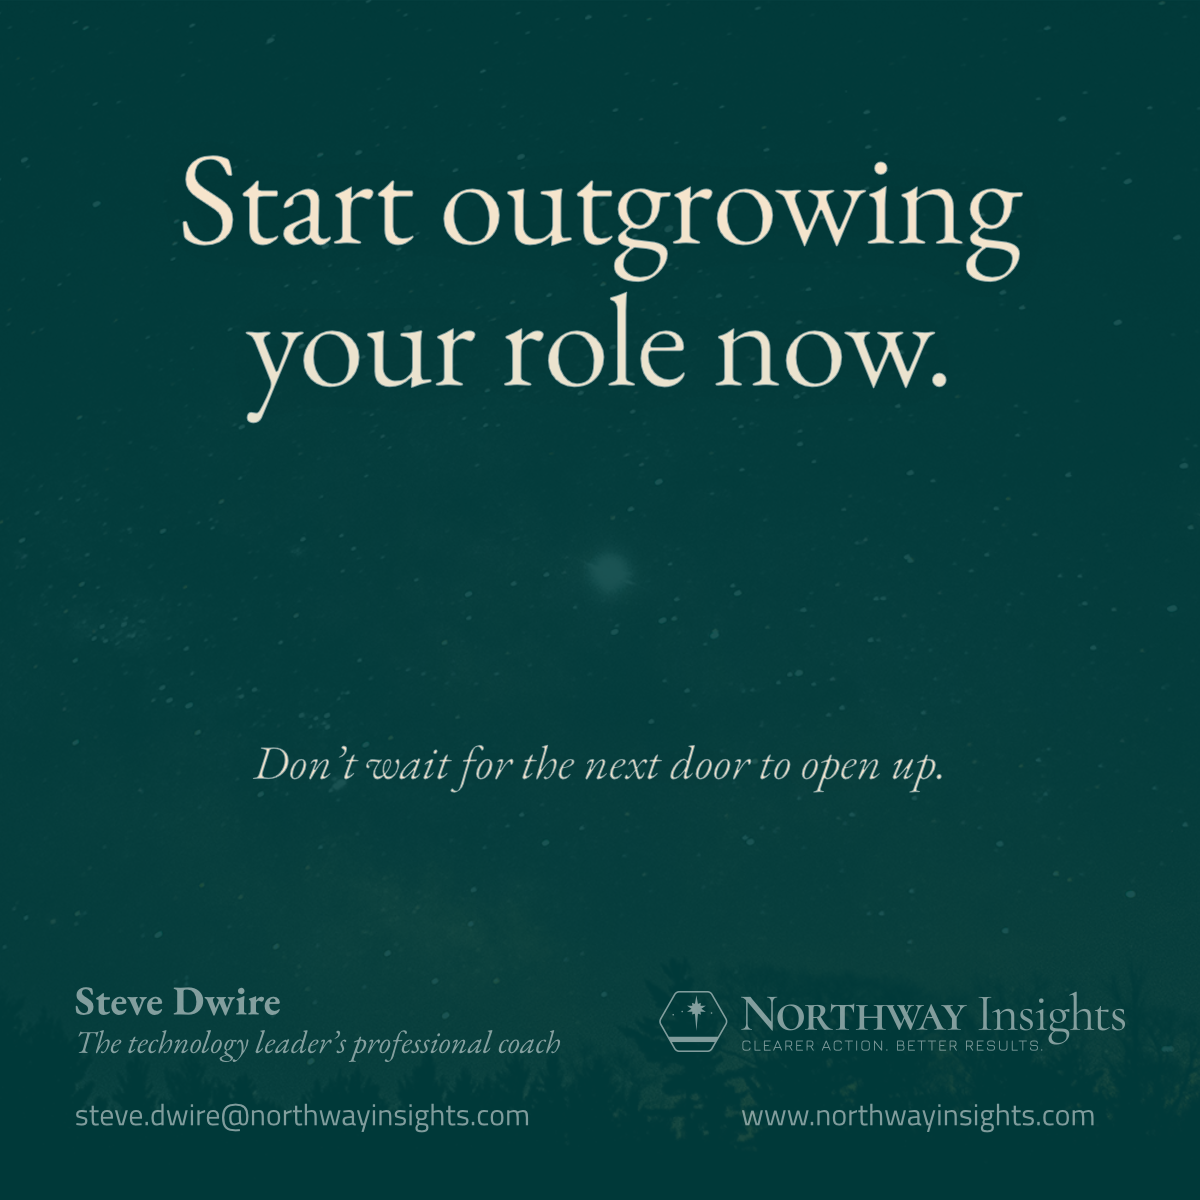 Start outgrowing your role now. (Don't wait for the next door to open up.)